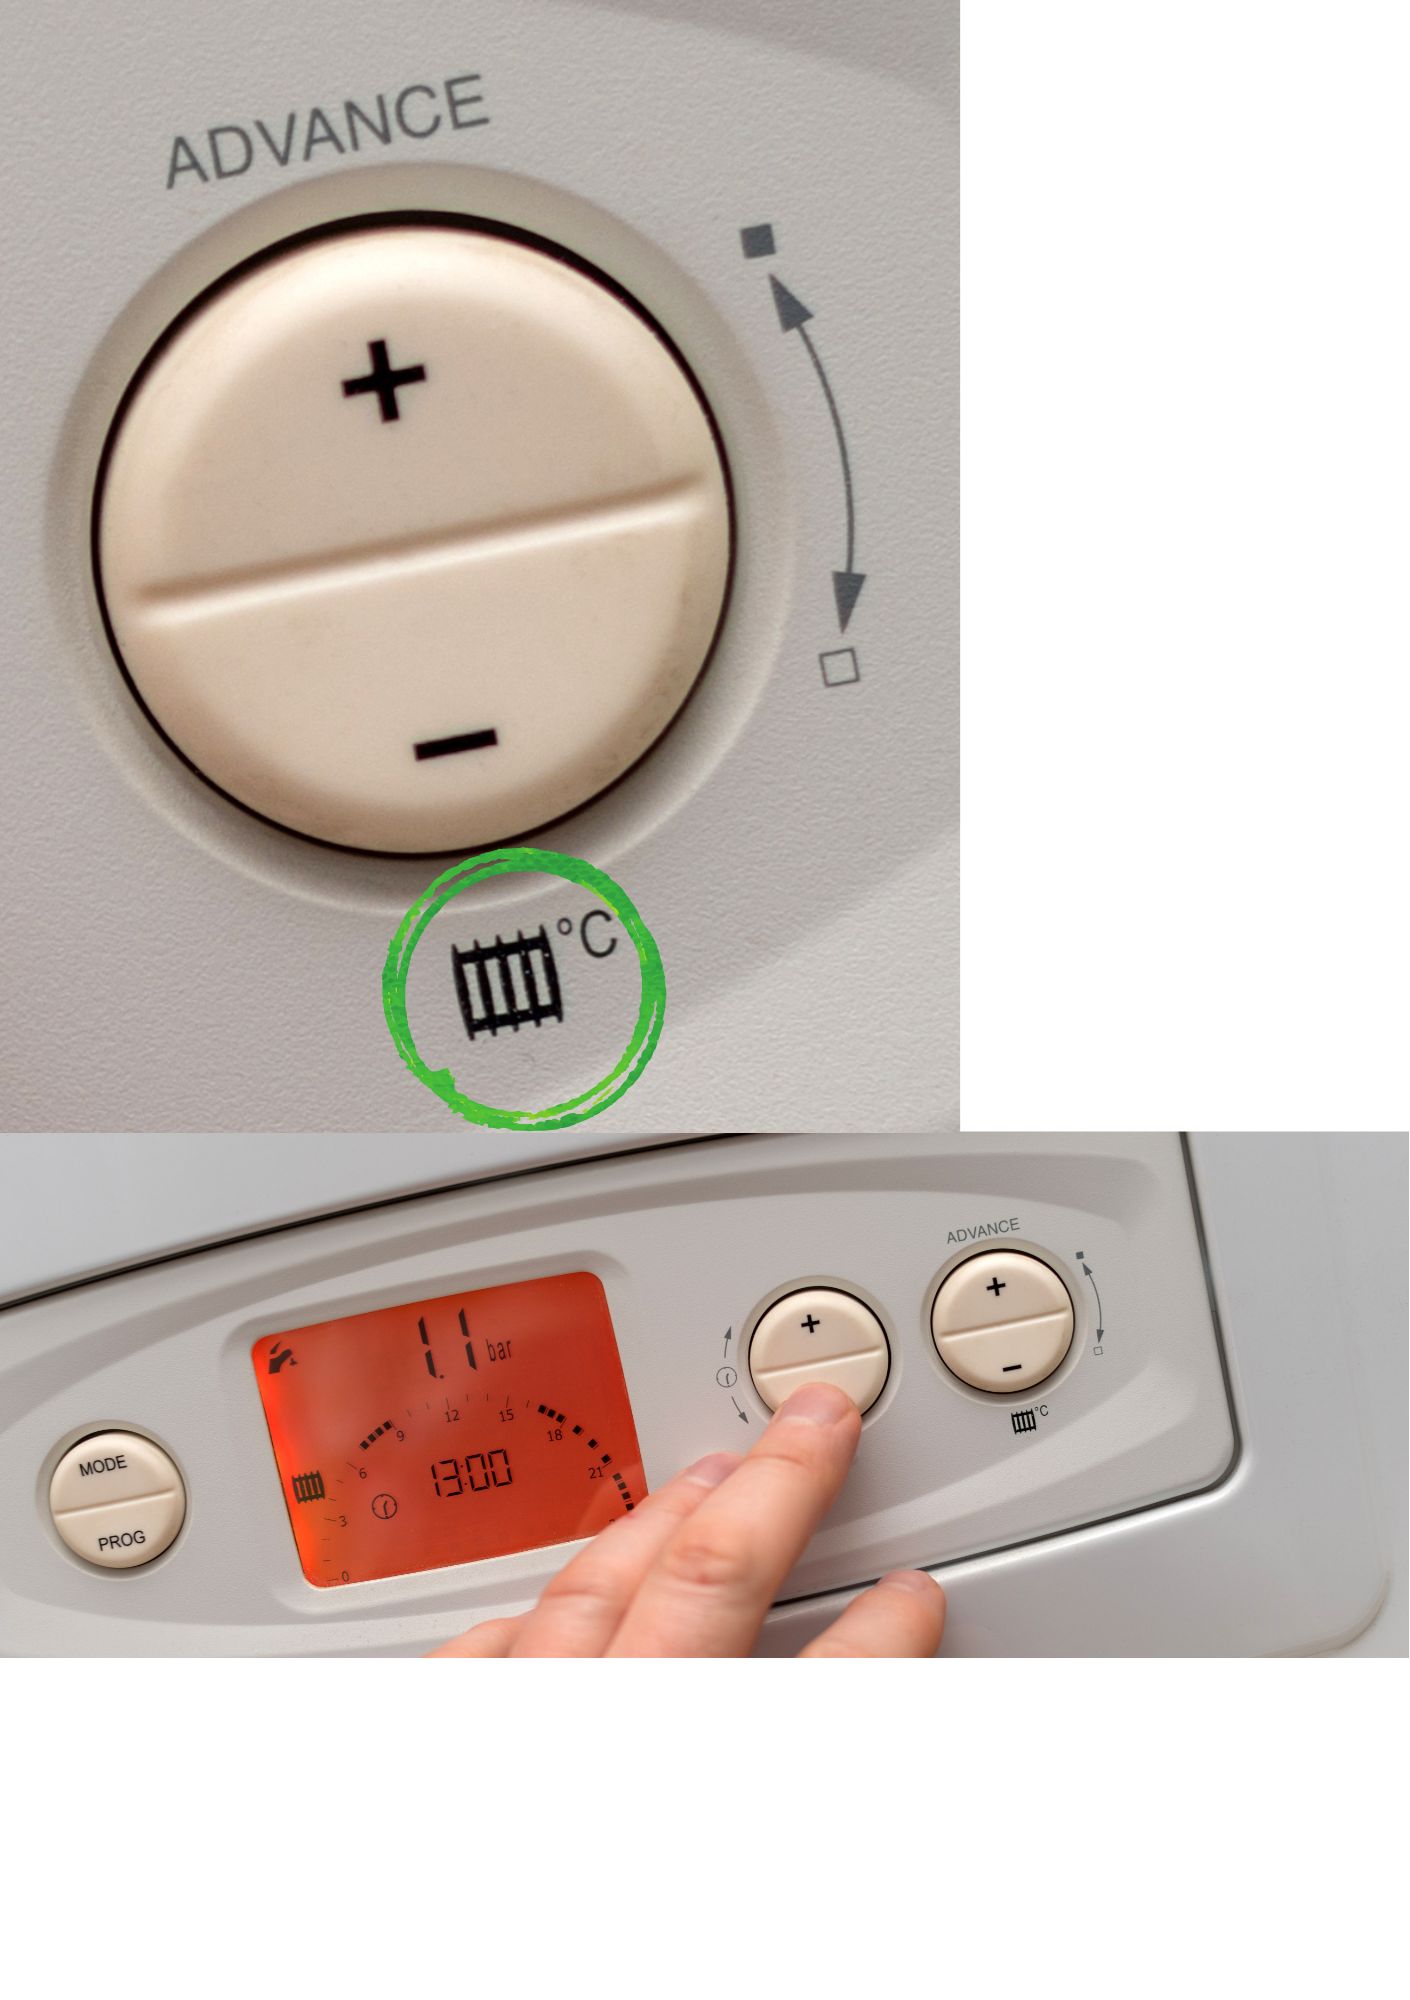 Image of a gas boiler with up and down buttons